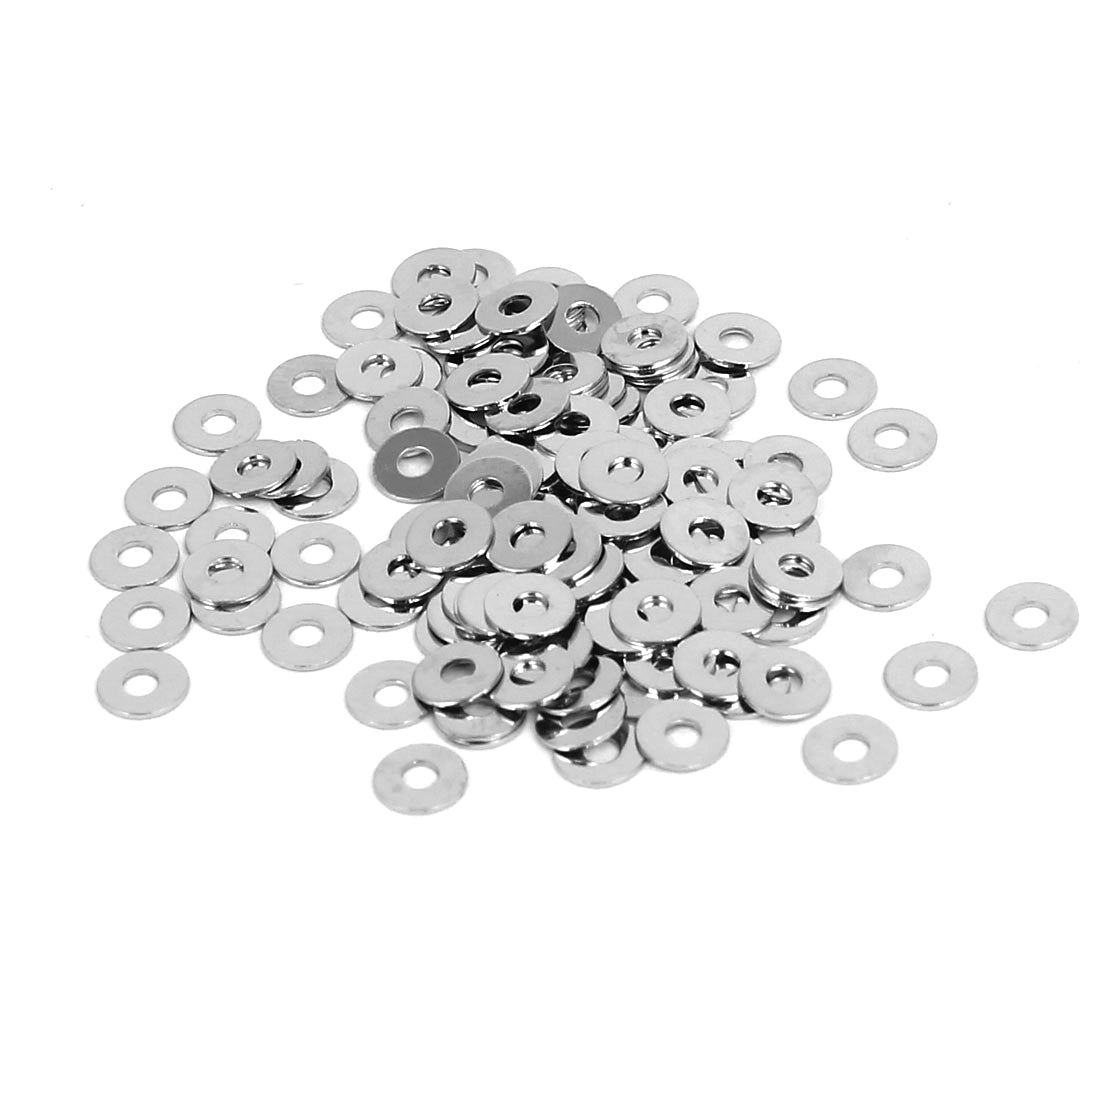 uxcell Uxcell M1.4 x 4mm x 0.3mm Nickel Plated Flat Washers Spacers Gaskets Fastener 100PCS